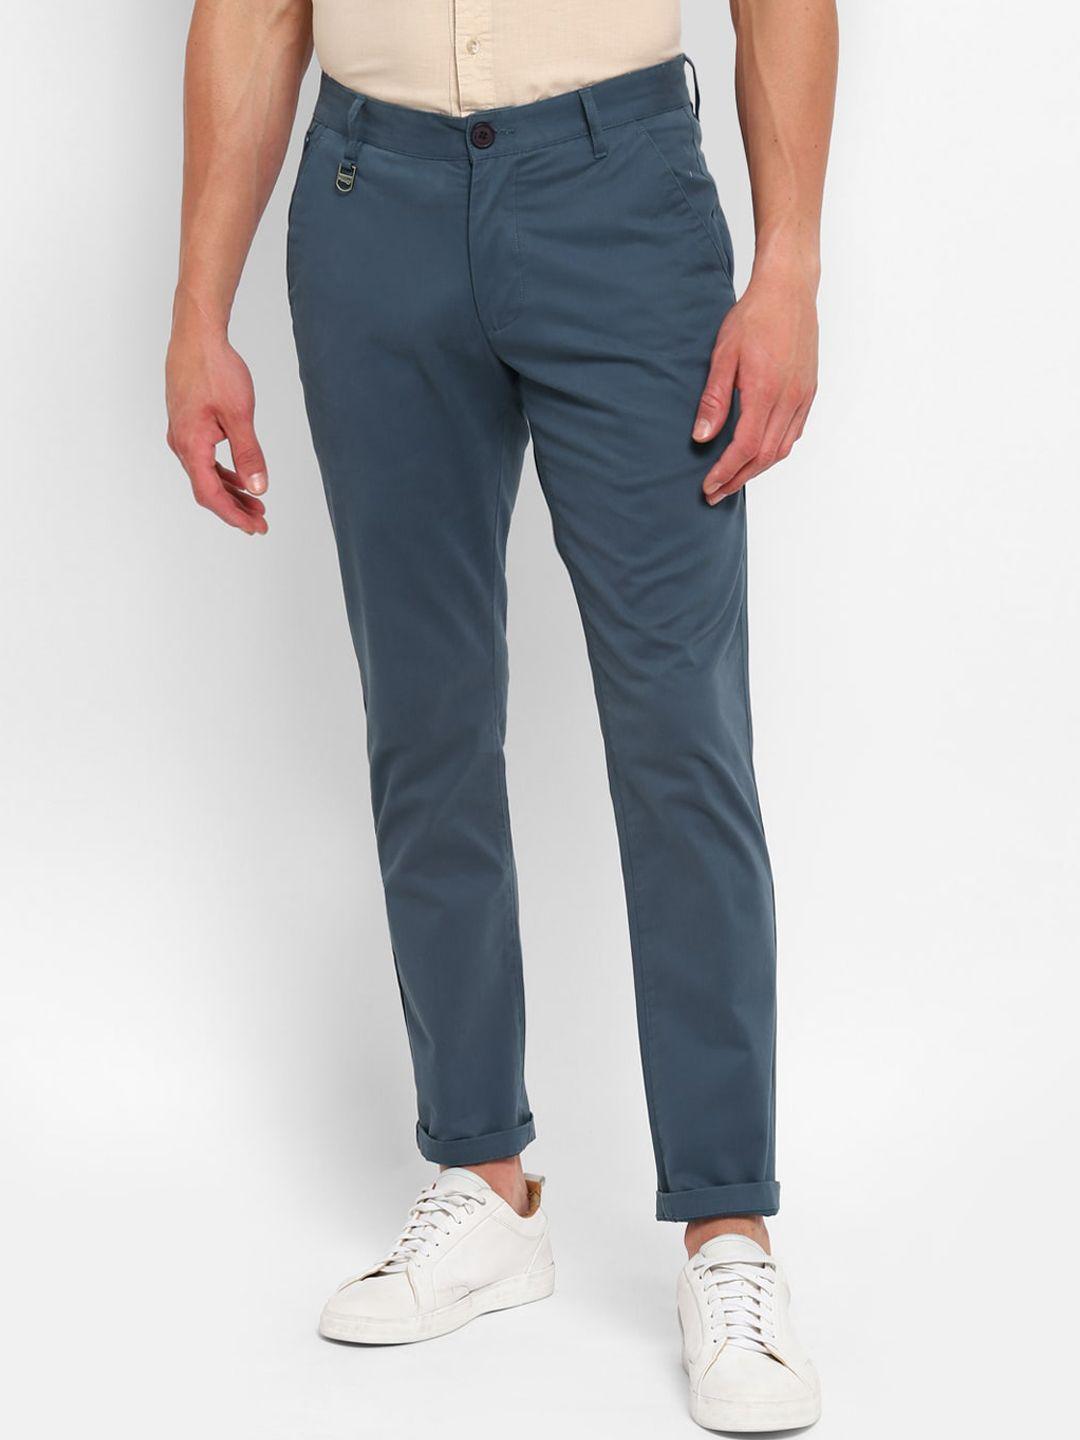 red-chief-men-mid-rise-regular-fit-chinos